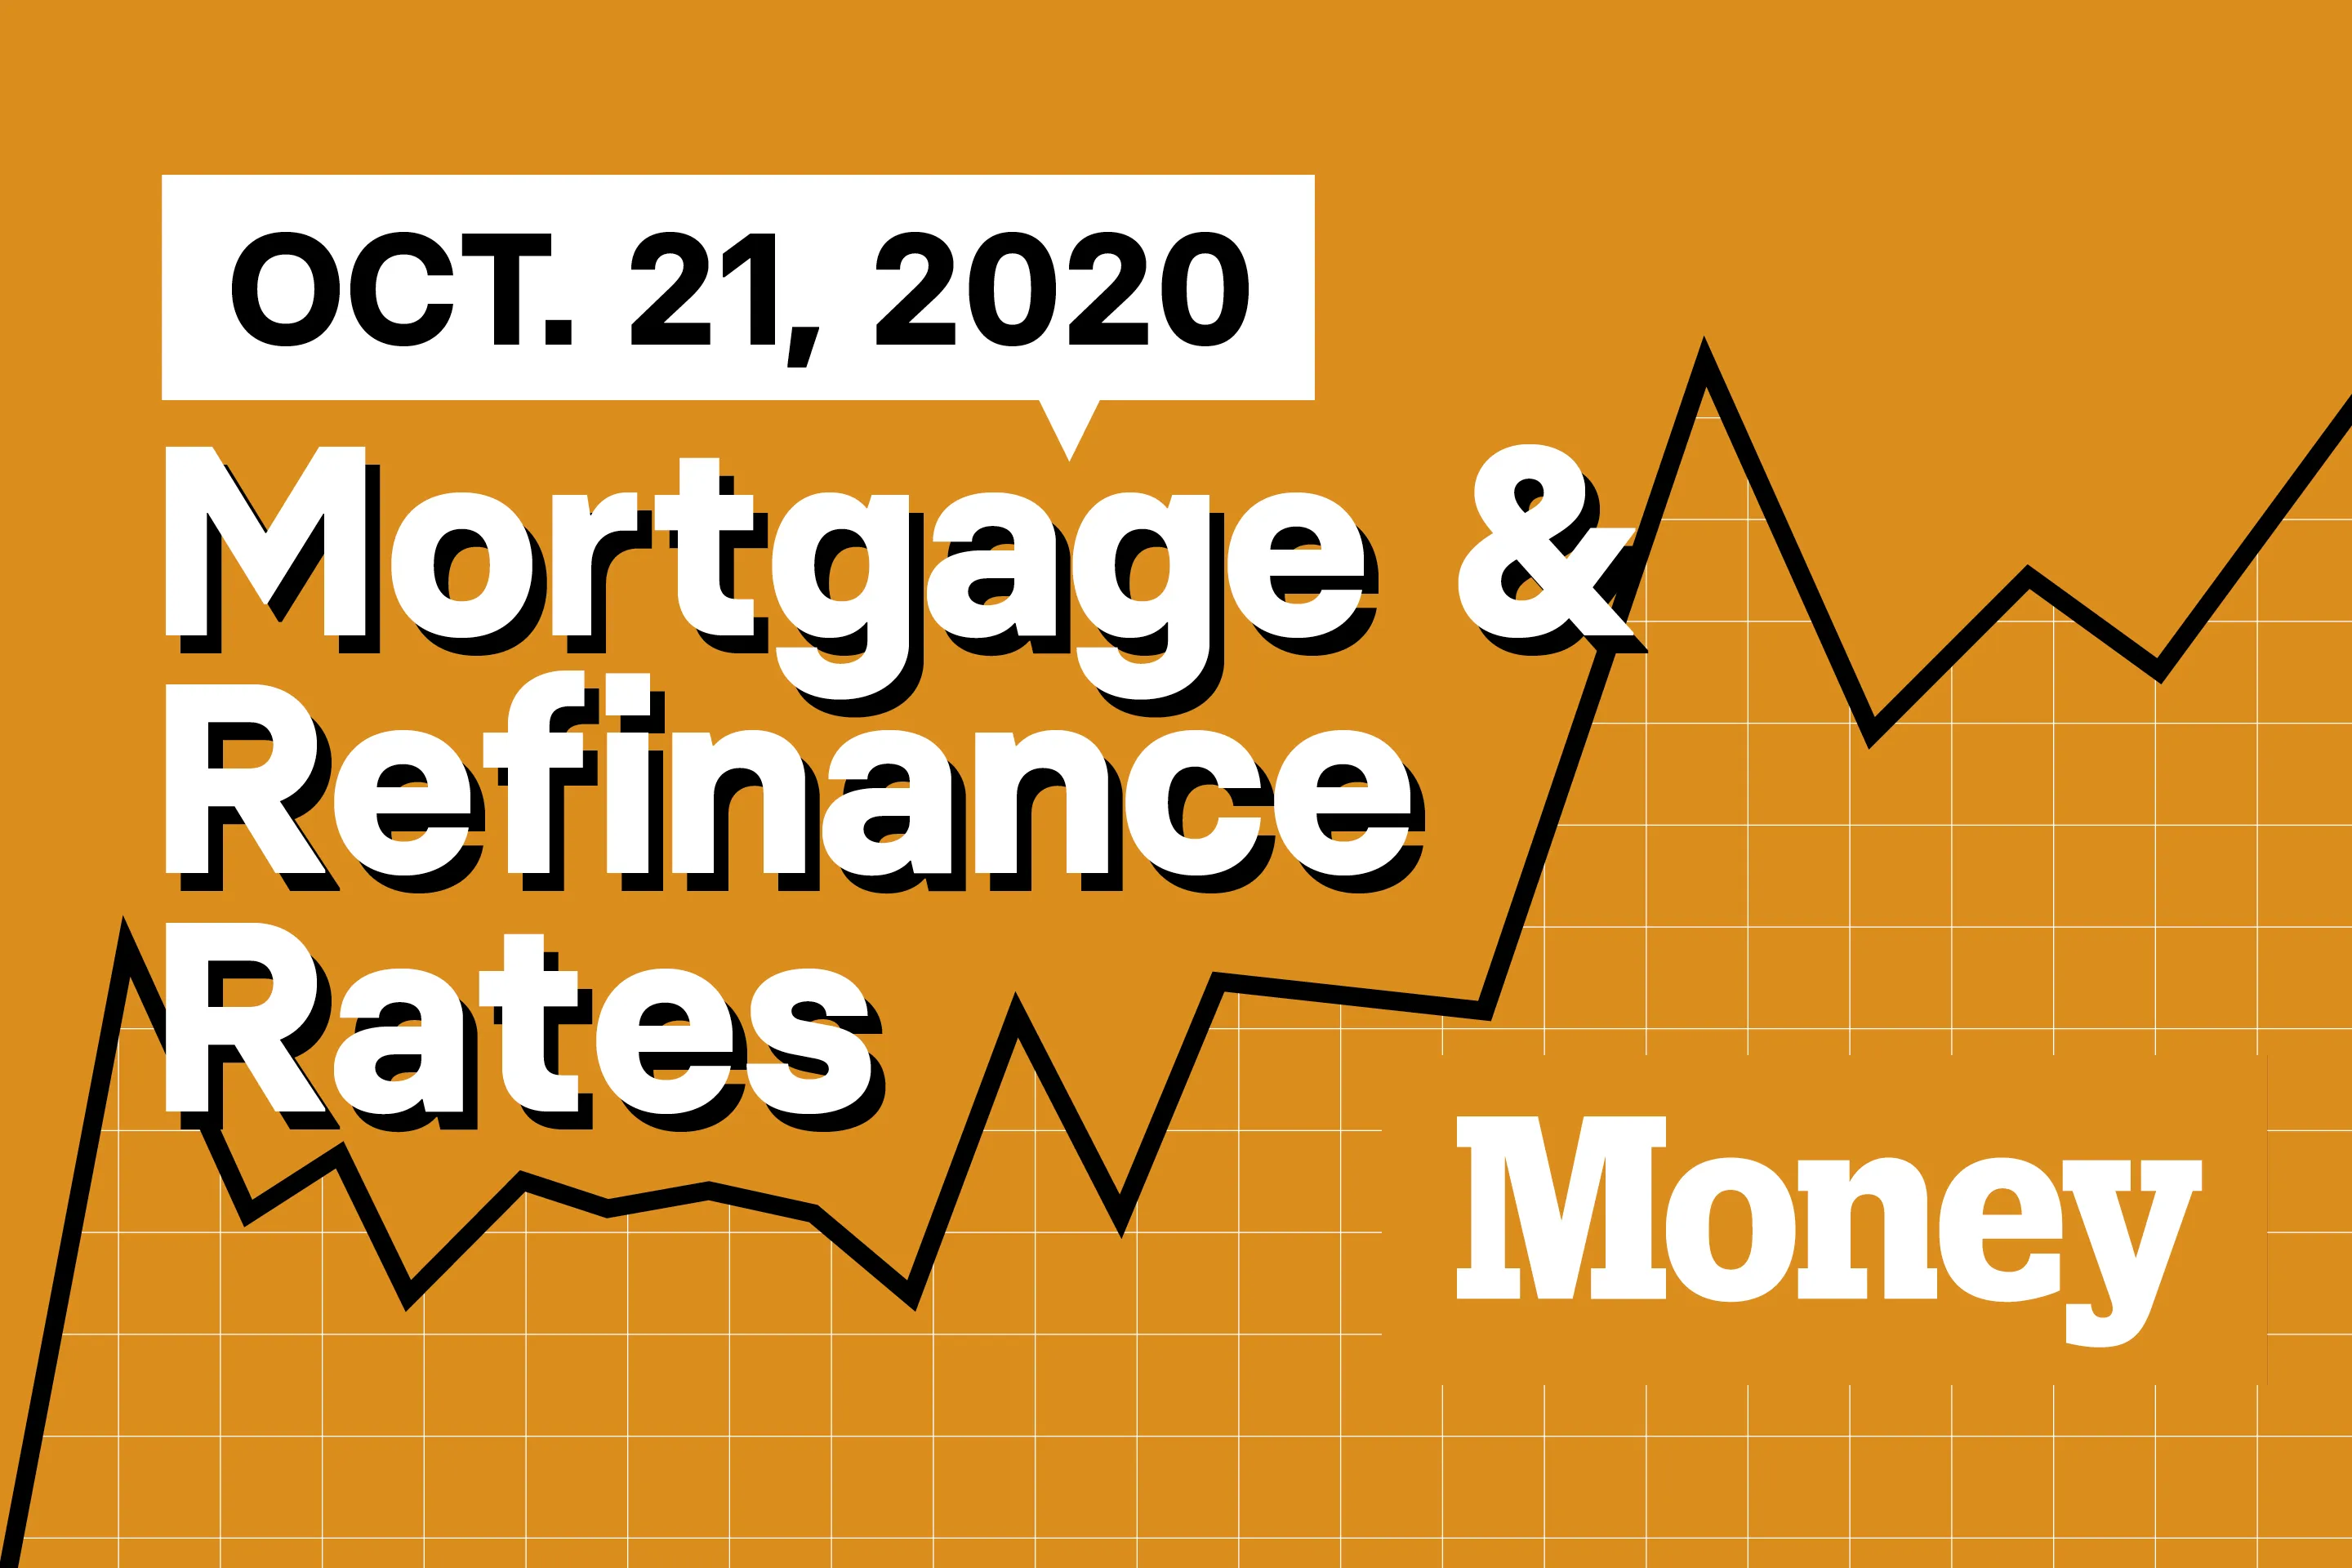 Here Are Today's Best Mortgage & Refinance Rates for October 21, 2020